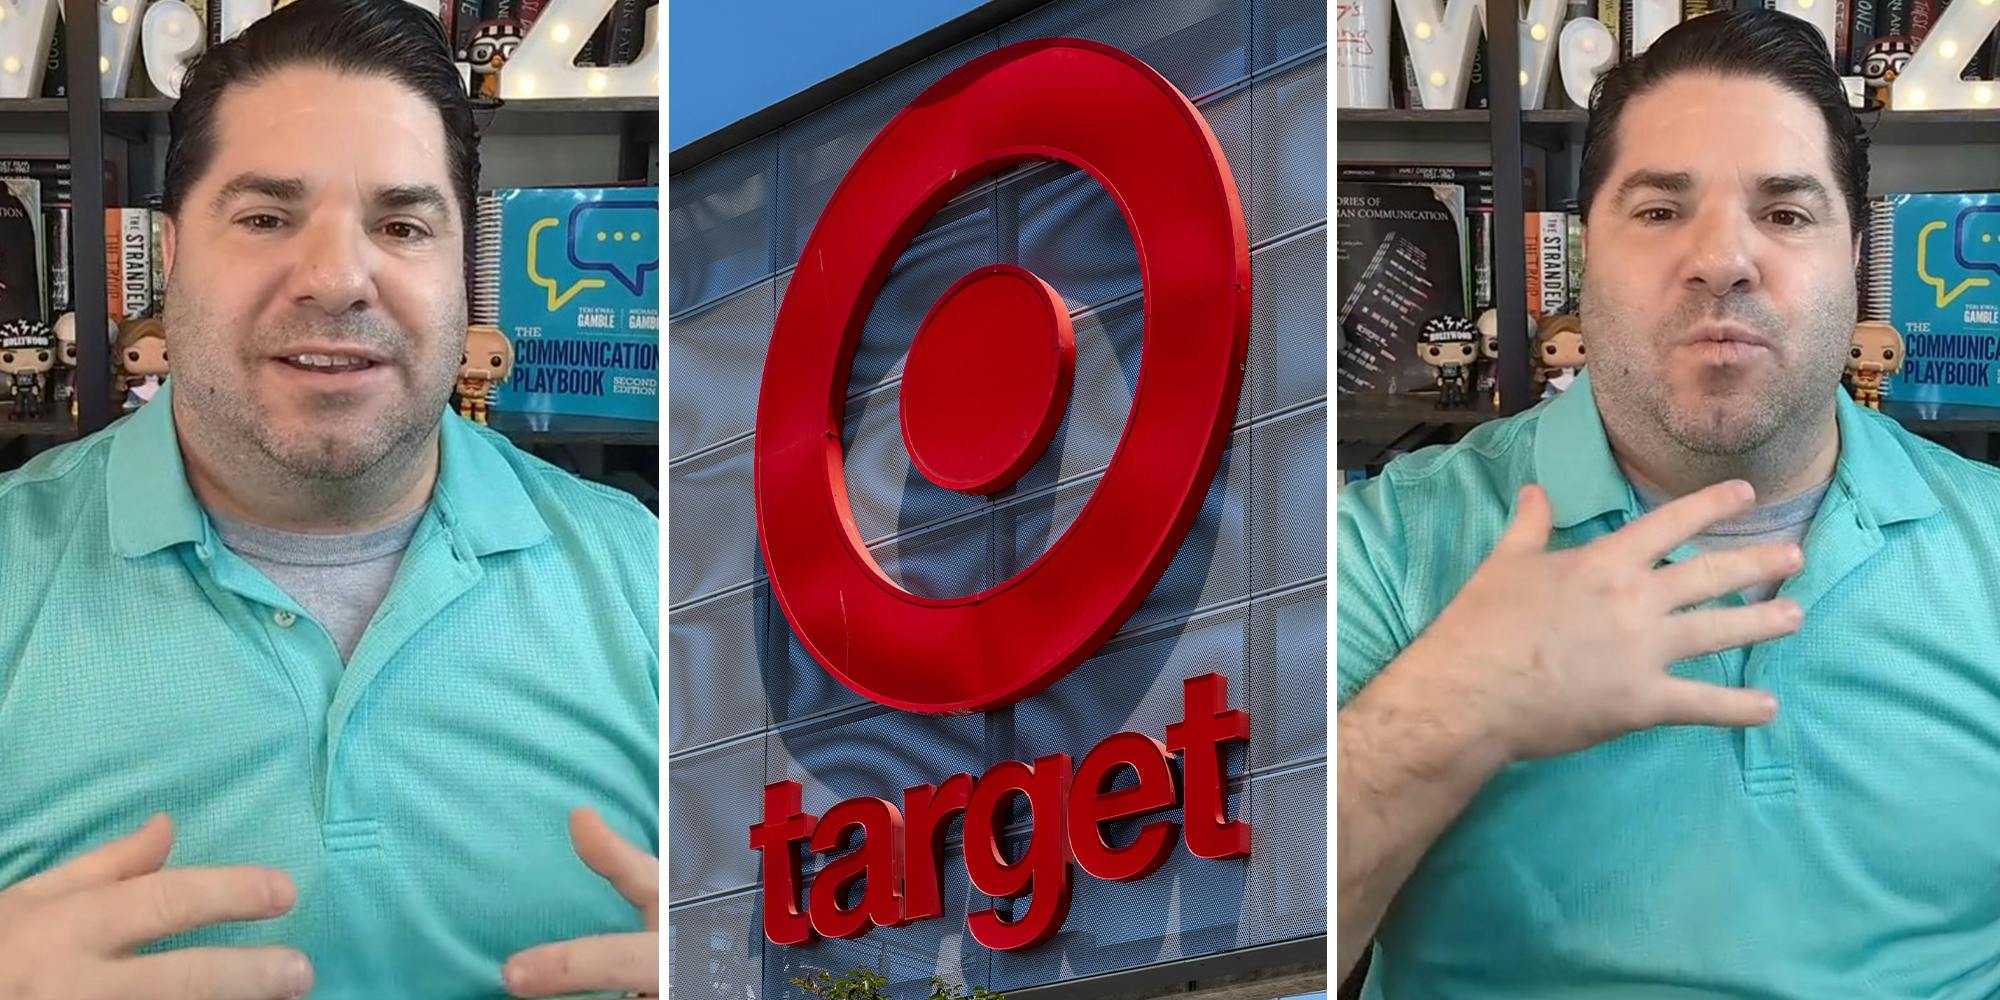 ‘They want me to shop in the dark while sweating?’: Expert says Target is ditching A/C and dimming the lights to save money